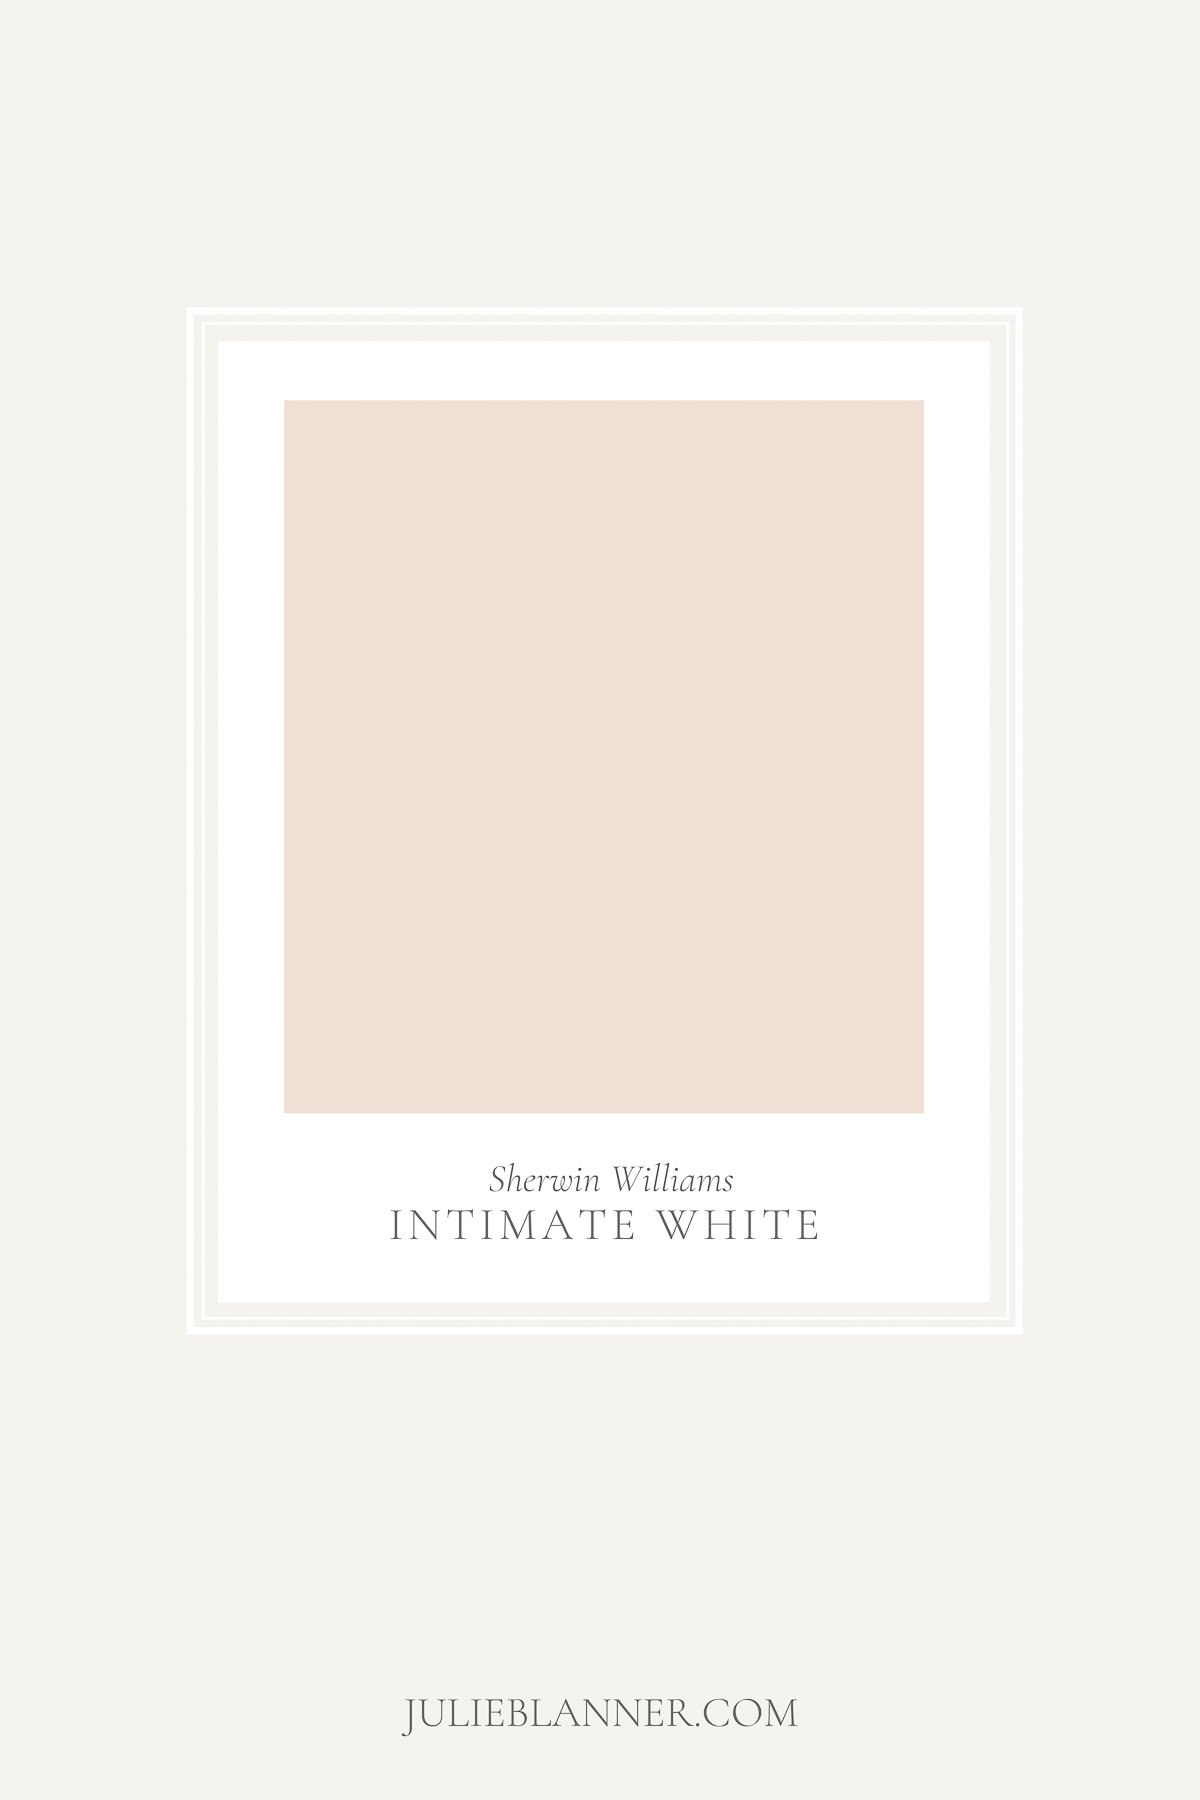 A paint sample card of Sherwin Williams Intimate White, as part of a blush pink paint guide.